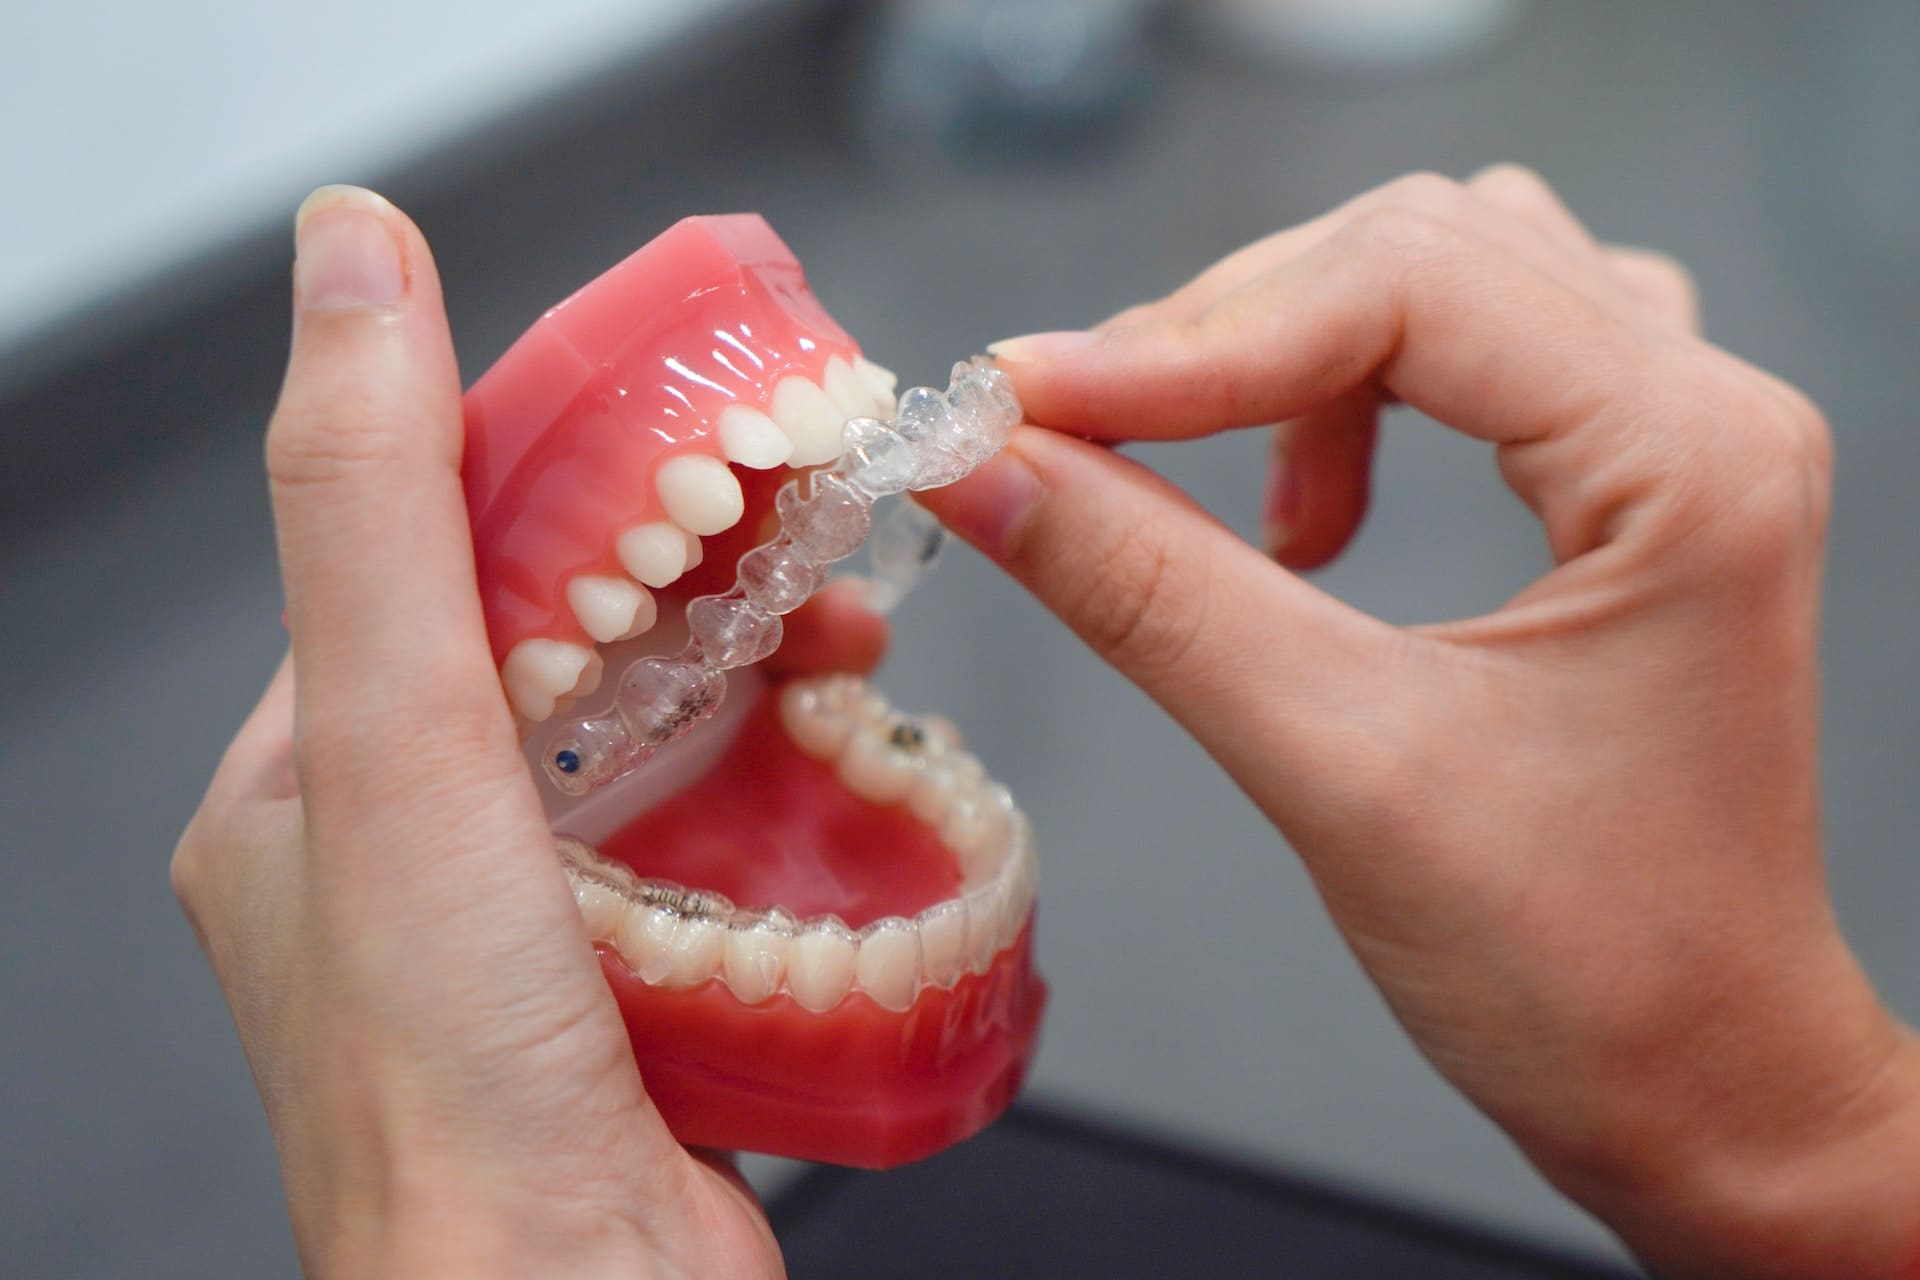 Invisalign Teen Treatment: A Modern, Comfortable Orthodontic Solution